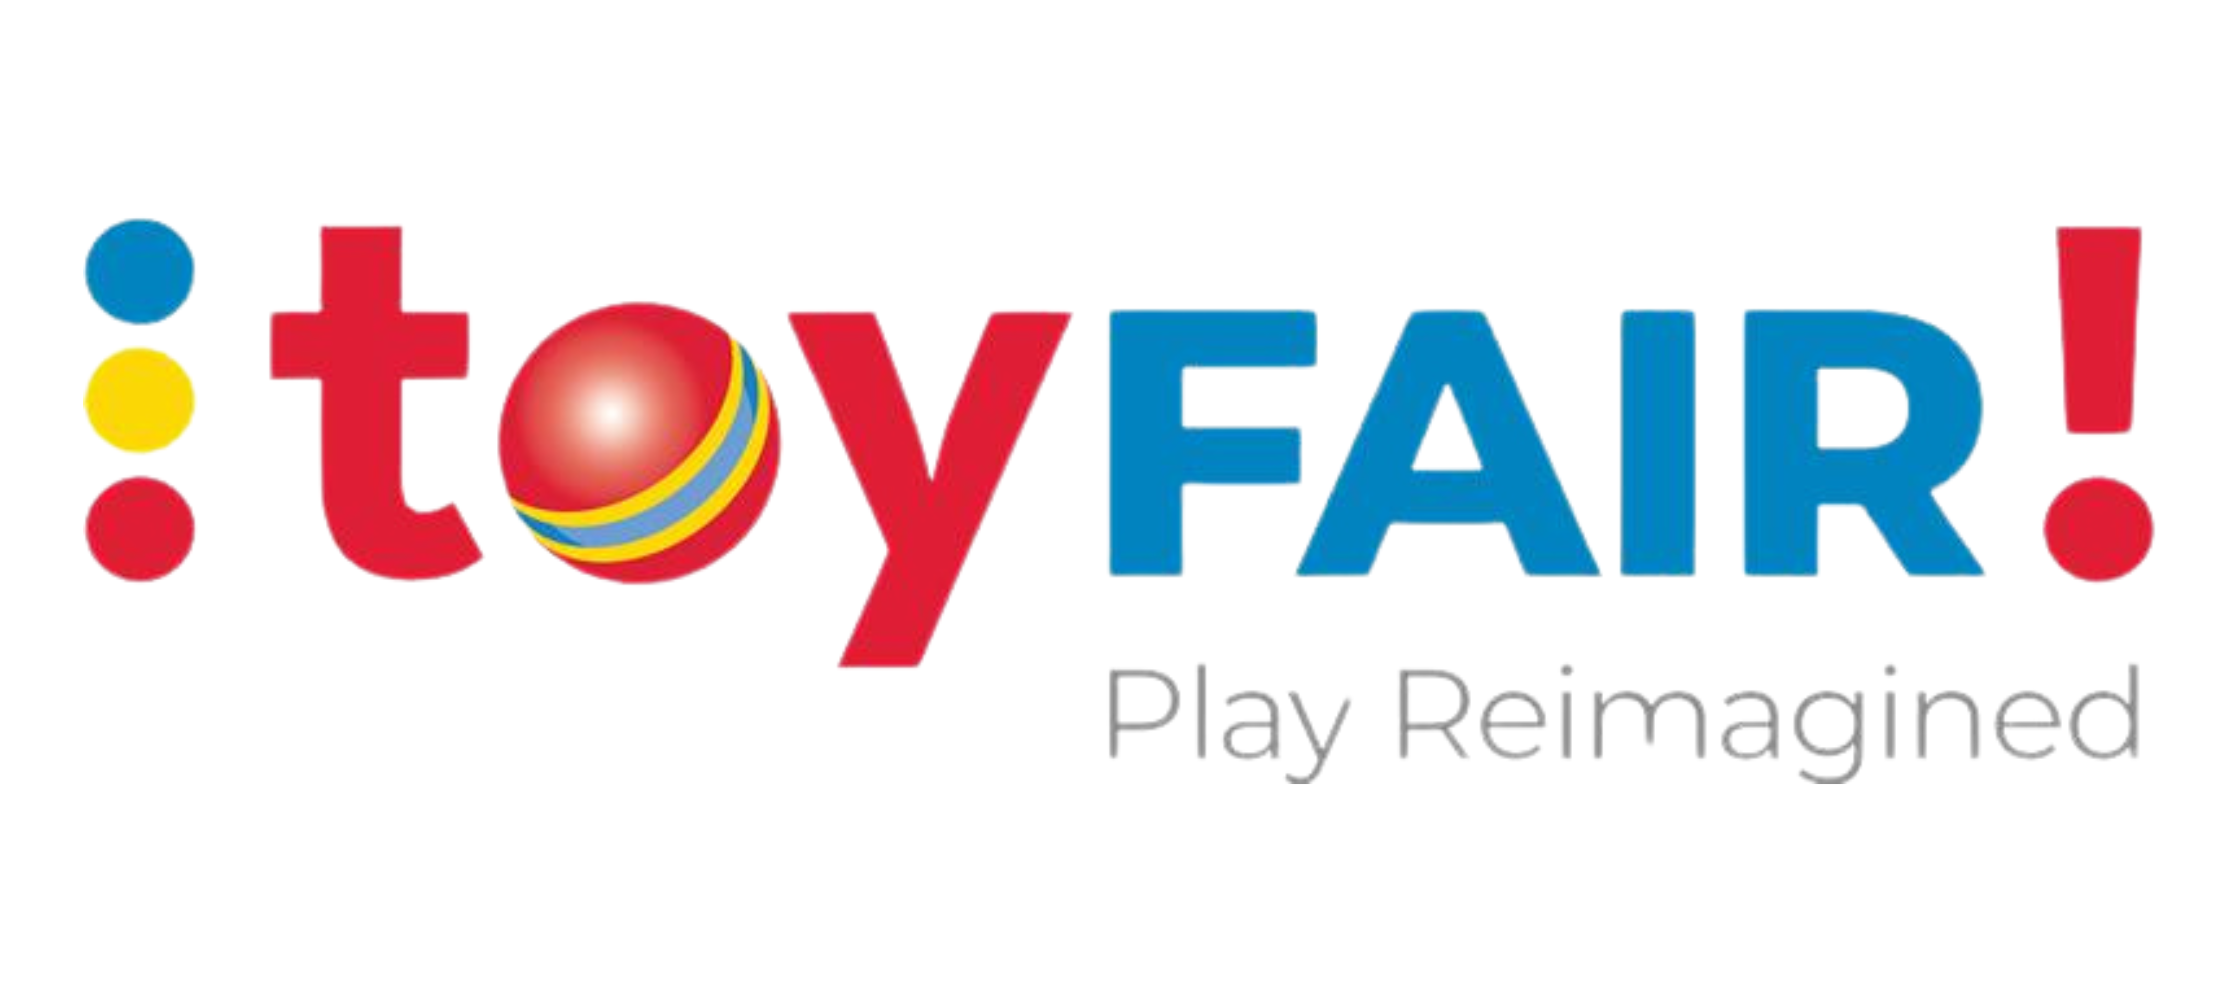 toyfair updated logo-1 Partnership Success: Map Your Show and T3 Expo Partner on Toy Fair